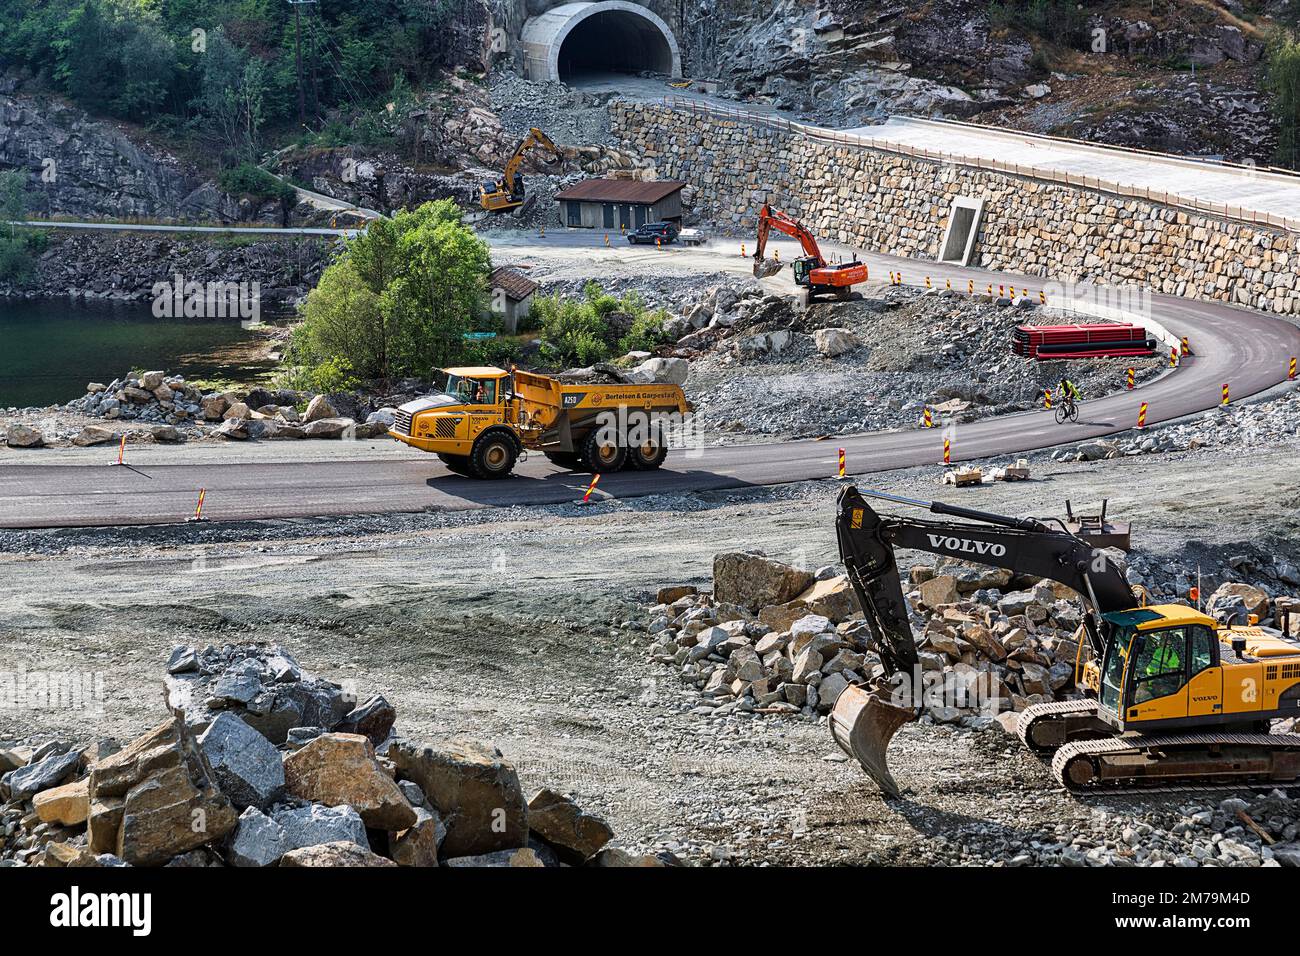 Vehicles and construction workers on road construction site in front of road tunnel, construction of new road in rocky area, Vestland, Norway Stock Photo